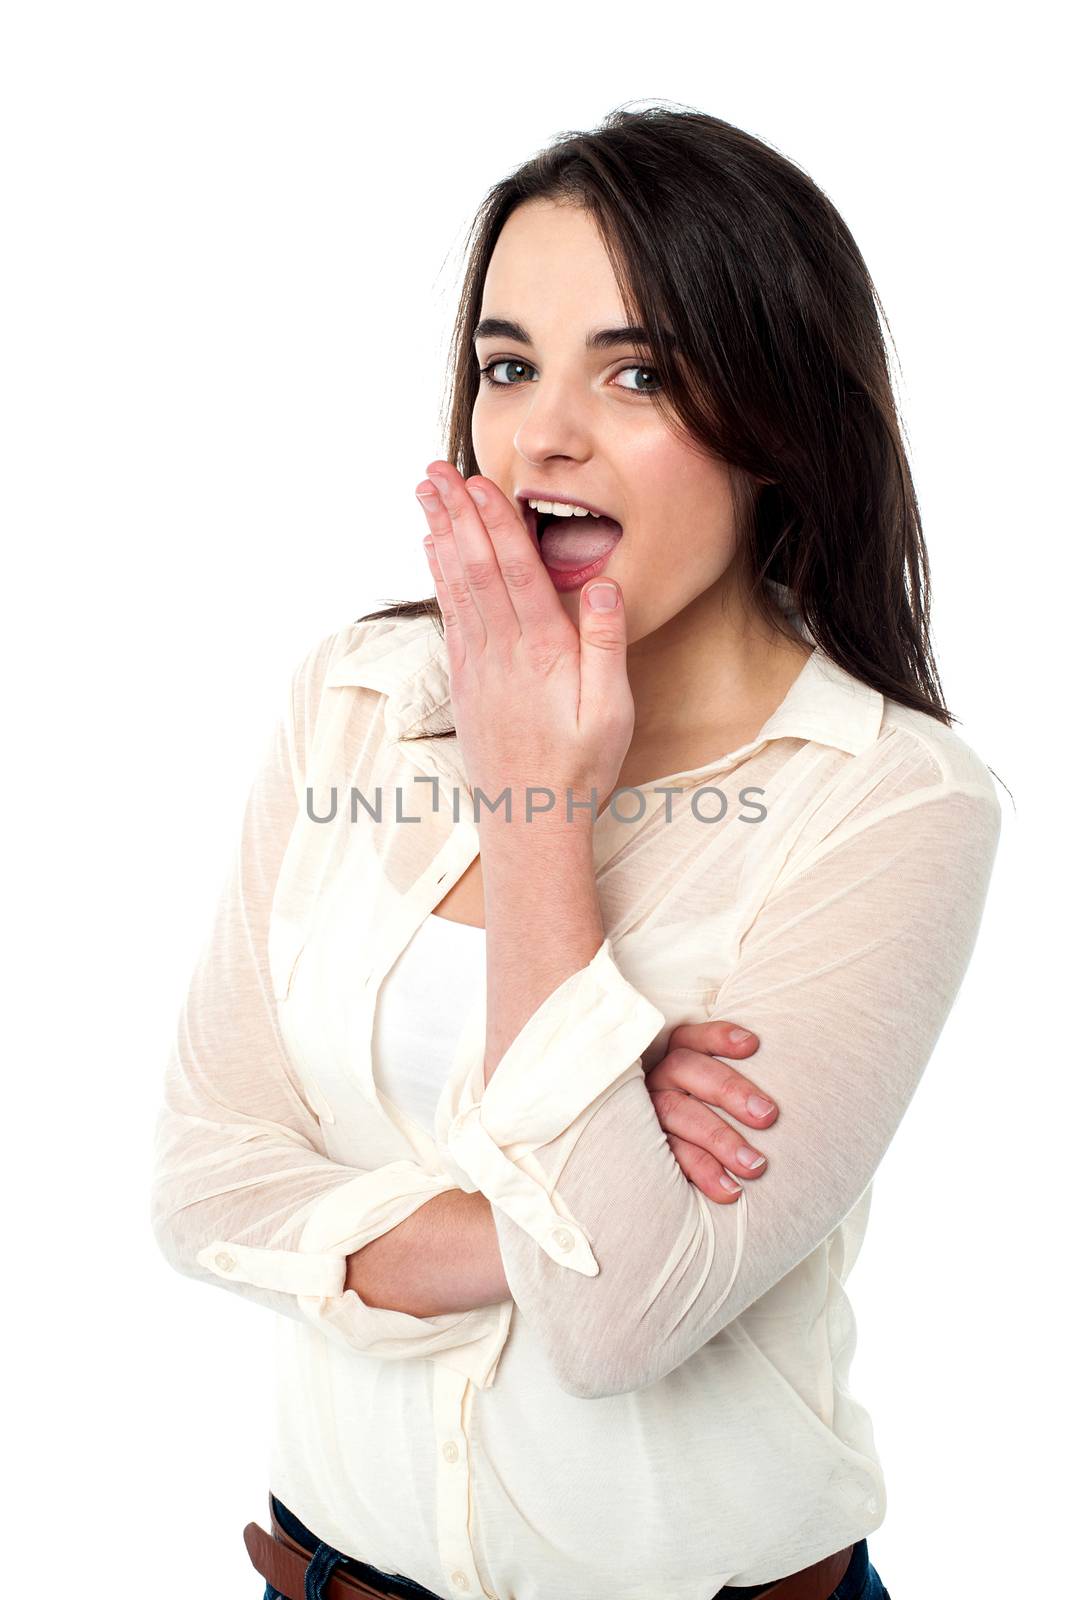 Joyous teen girl in casuals showing shocking sign to the camera.